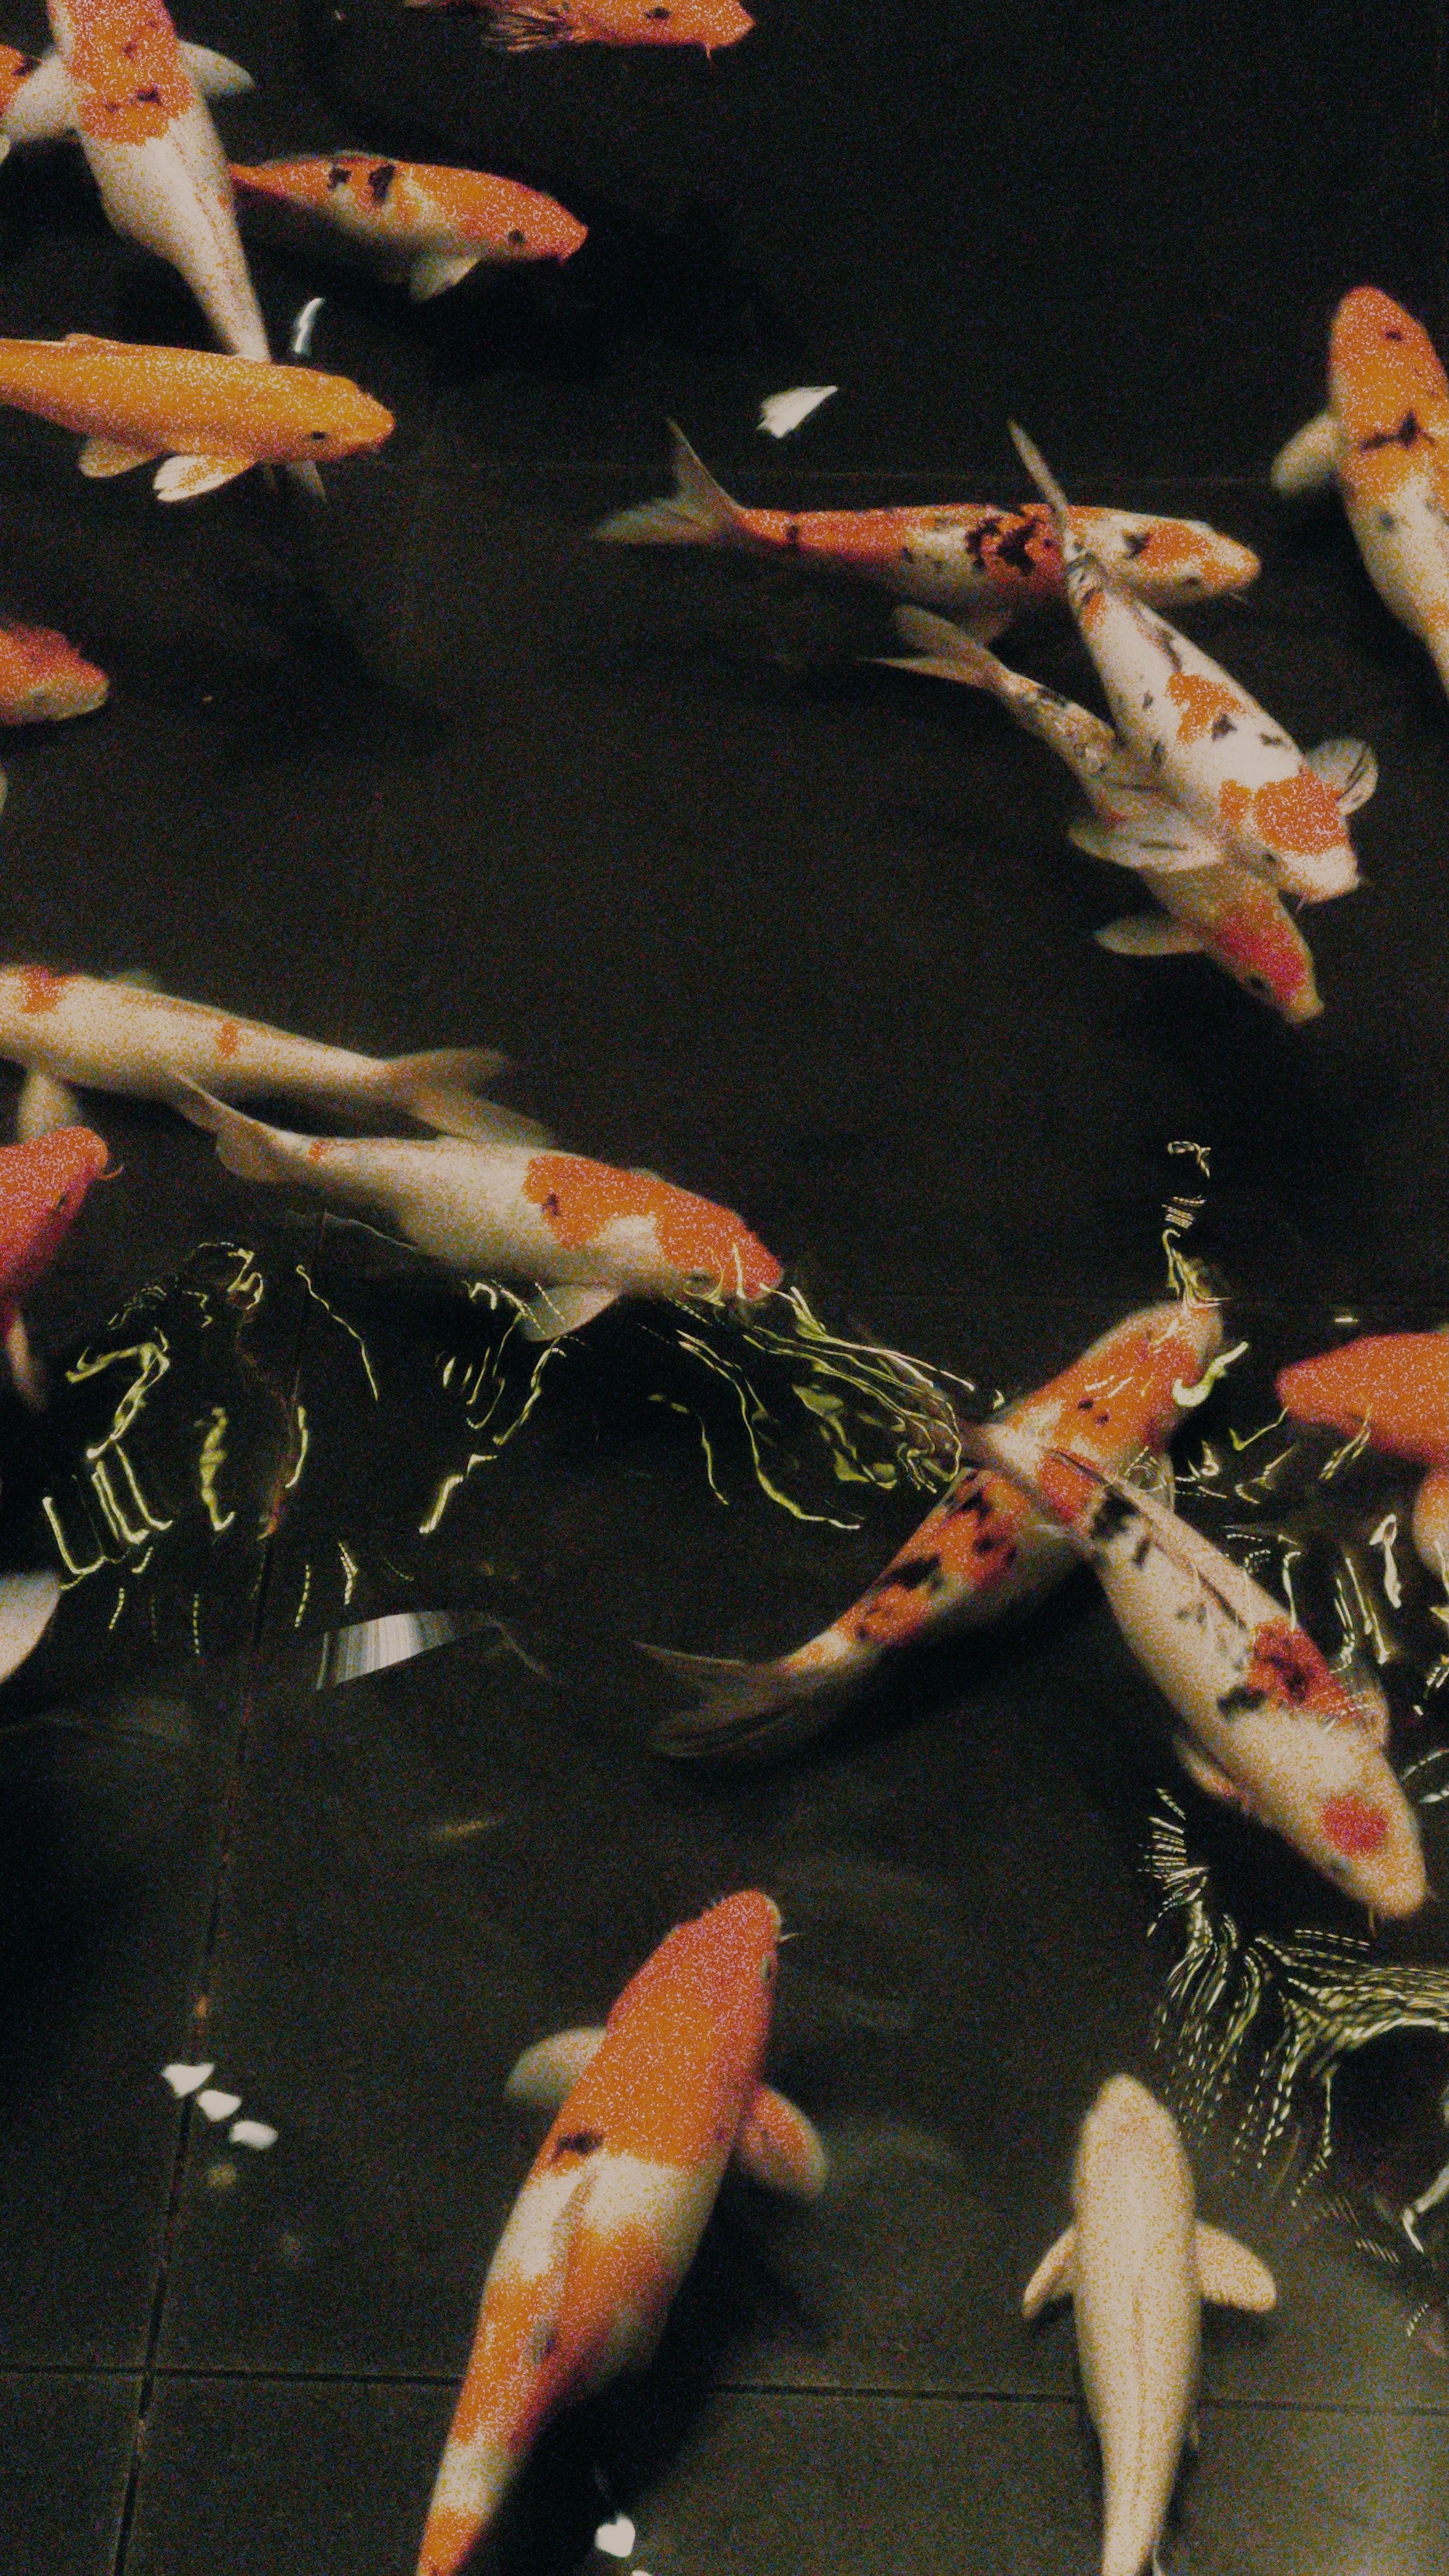 A group of fish swimming in water - Koi fish